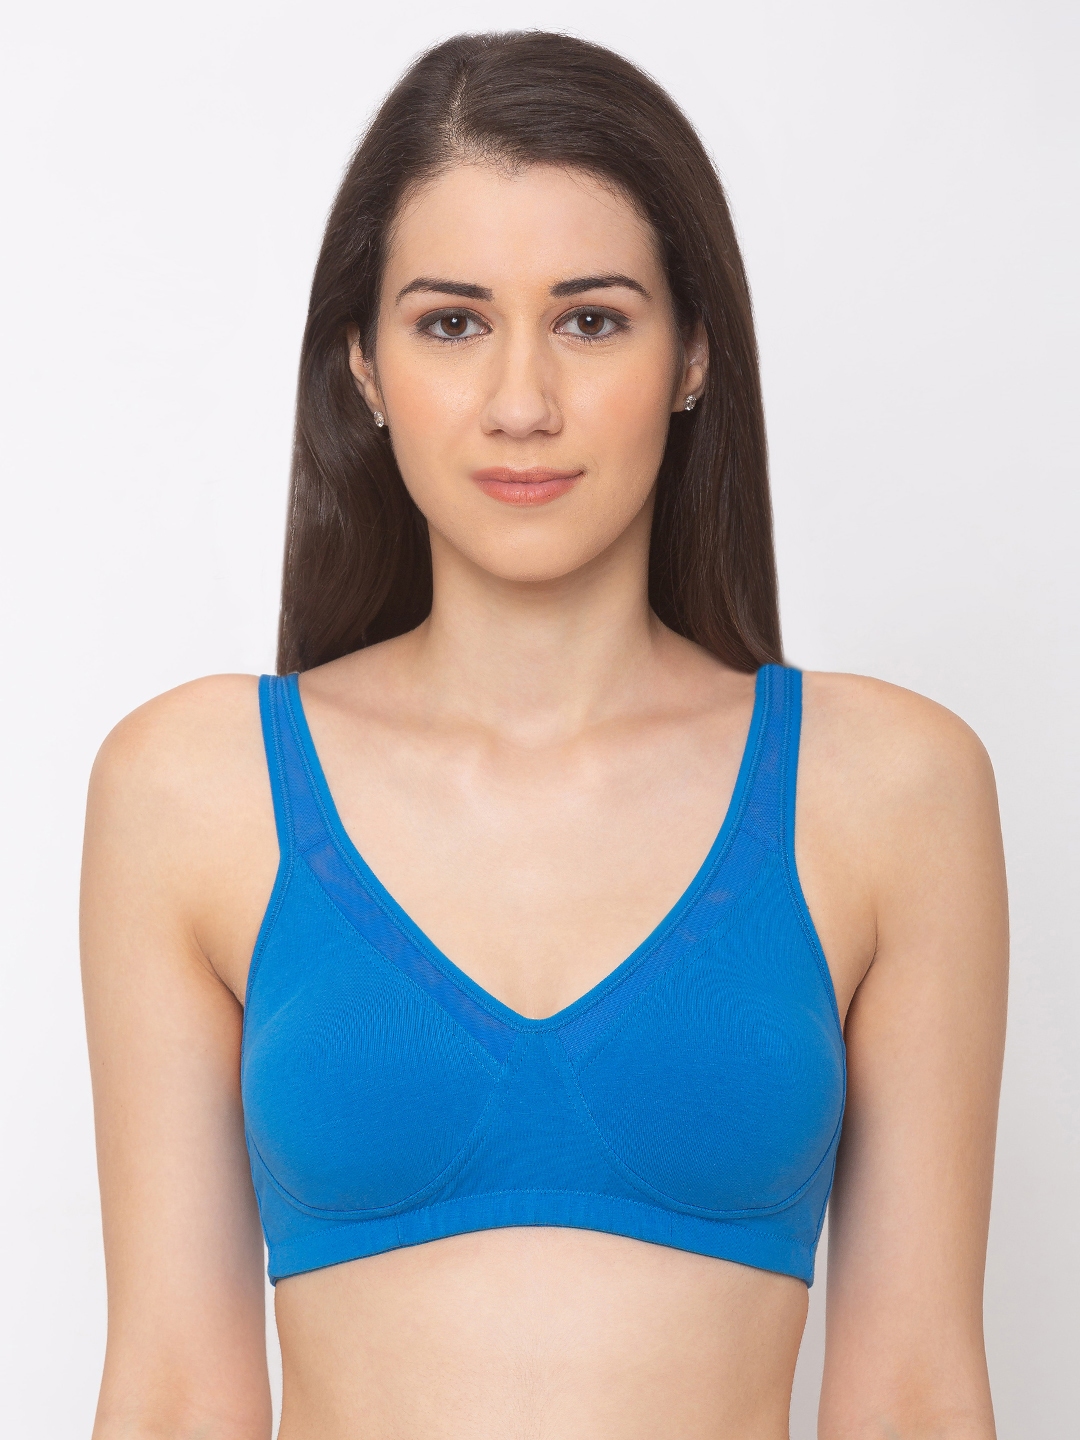 Buy Candyskin Comfort Cotton Bra - Lightly Padded, Non-Wired